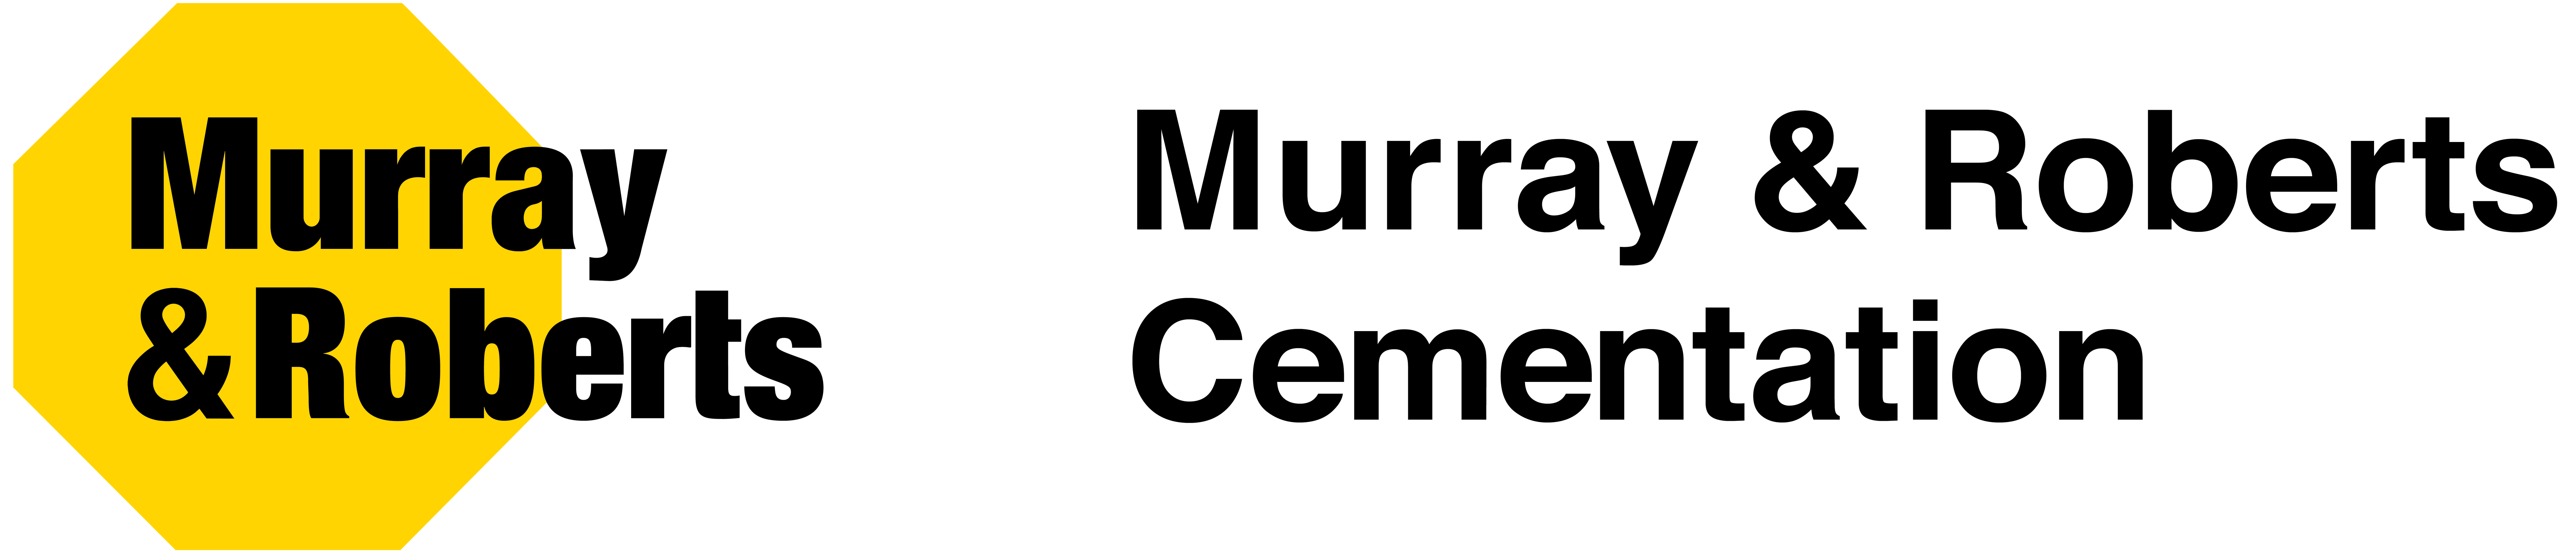 Murray & Roberts Cementation (Pty) Limited